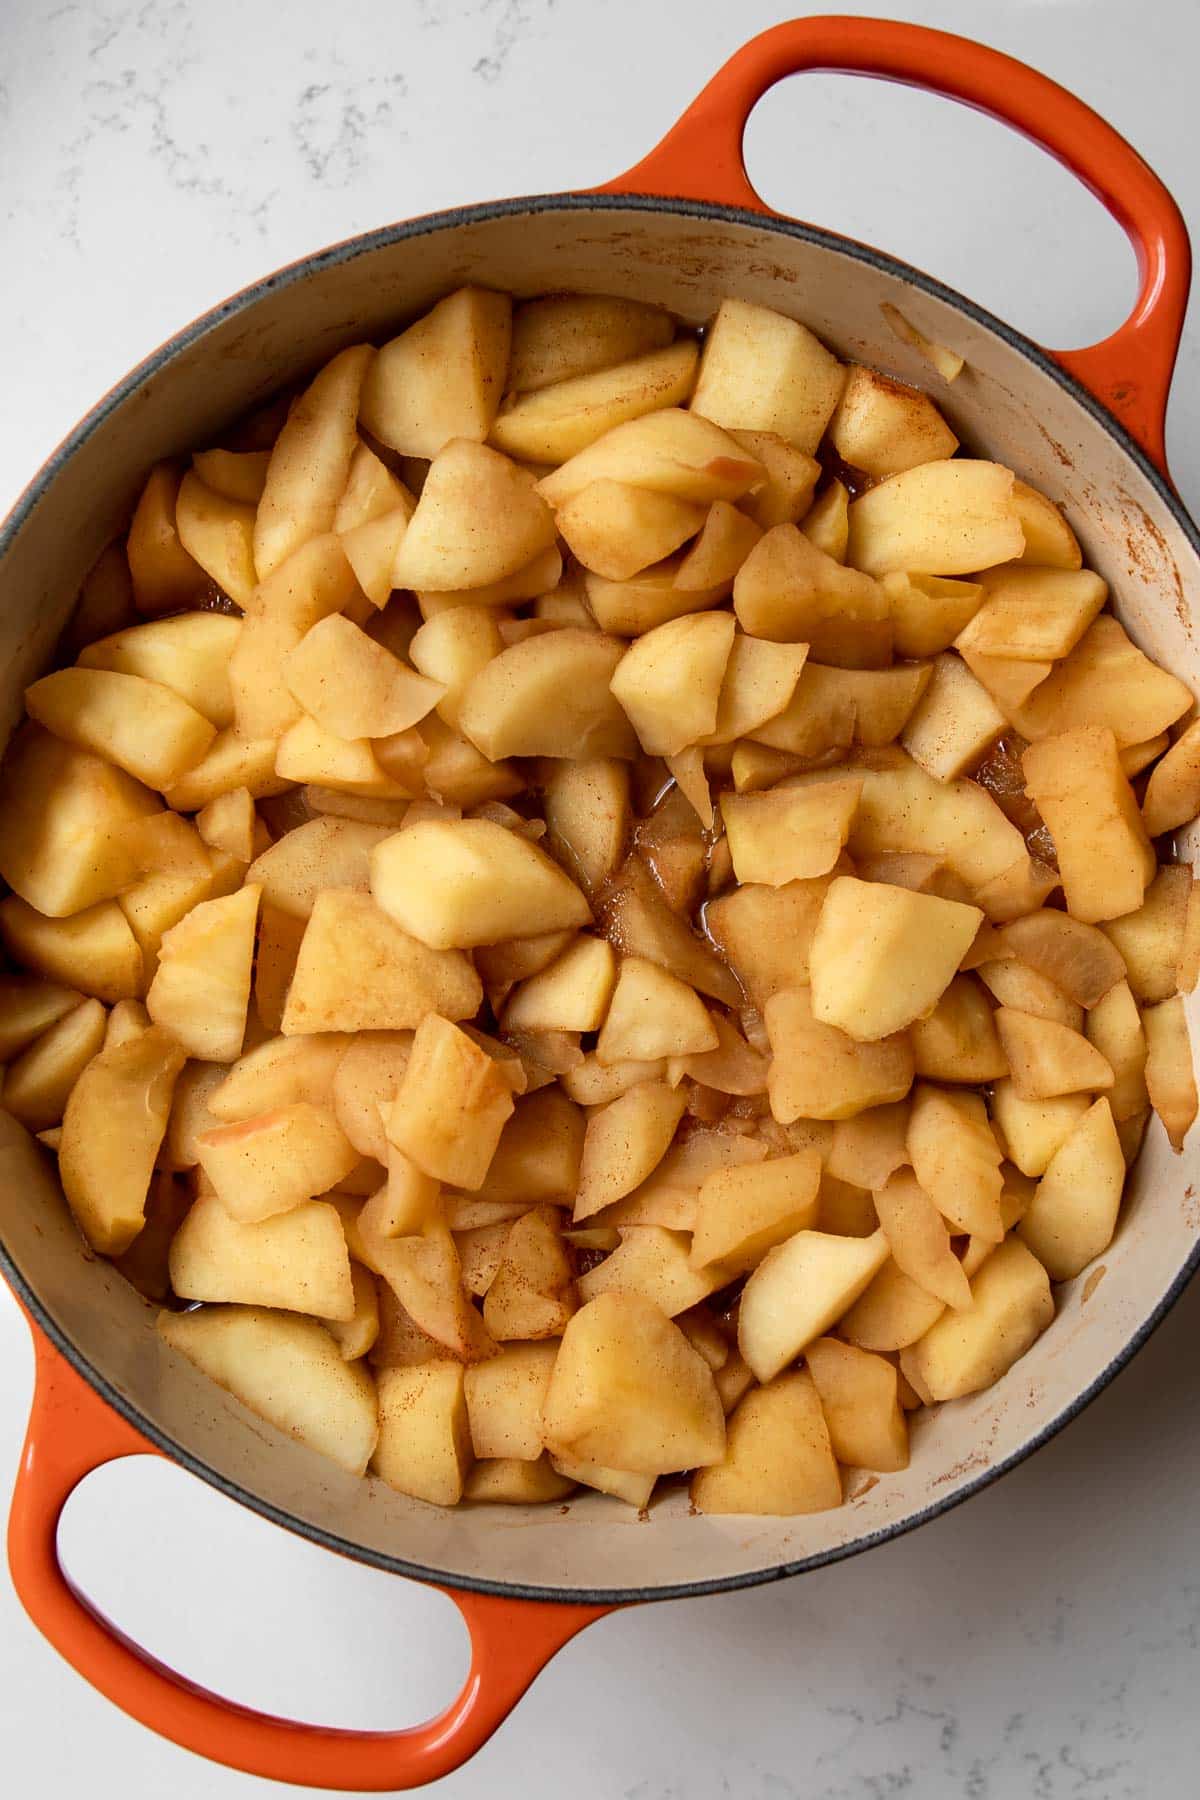 cut and cored apples tossed in cinnamon in a Dutch oven pot softened from cooking